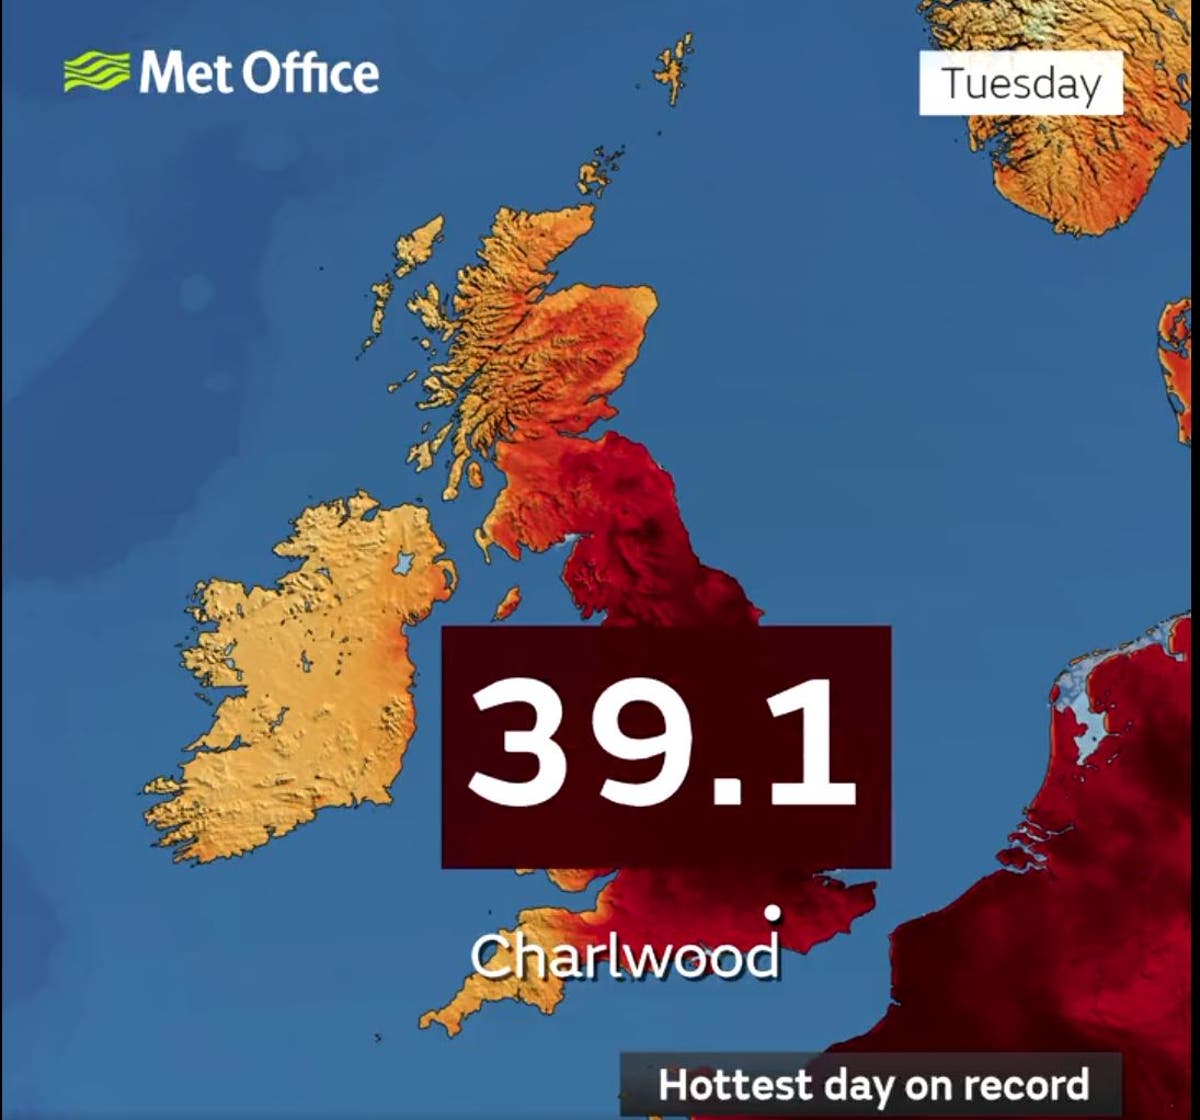  UK weather forecast: Hottest ever temperature recorded at 39.1C